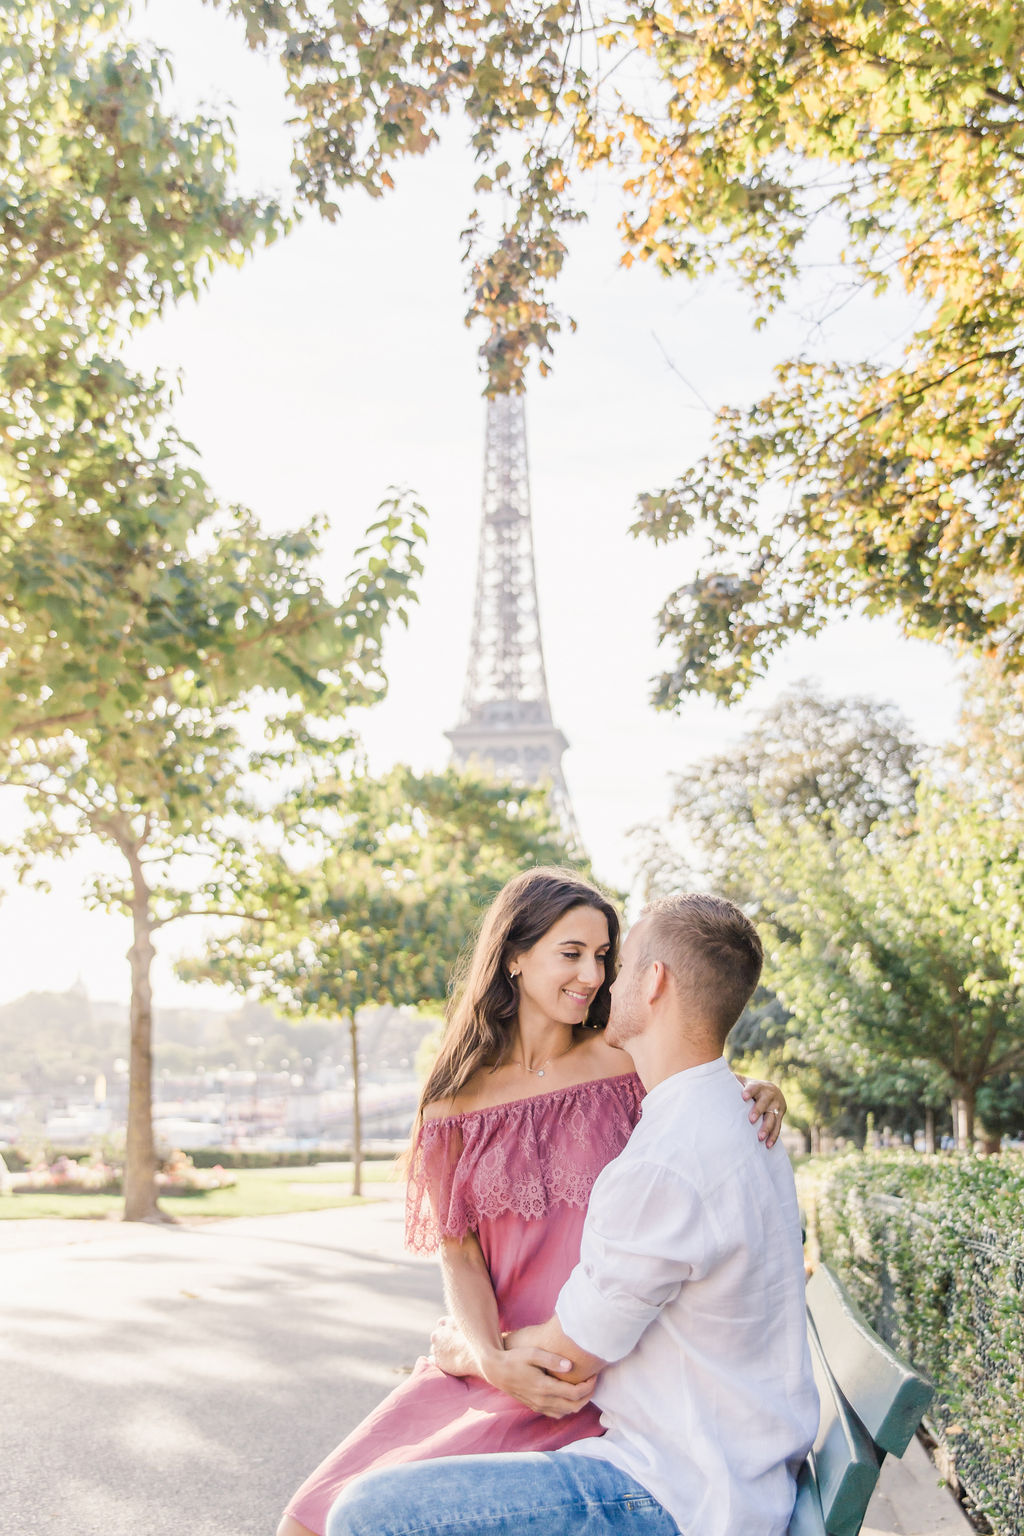 Engagement Photos in Paris' Trocadero With a Stunning View of Eiffel Tower by Celine on OneThreeOneFour 17